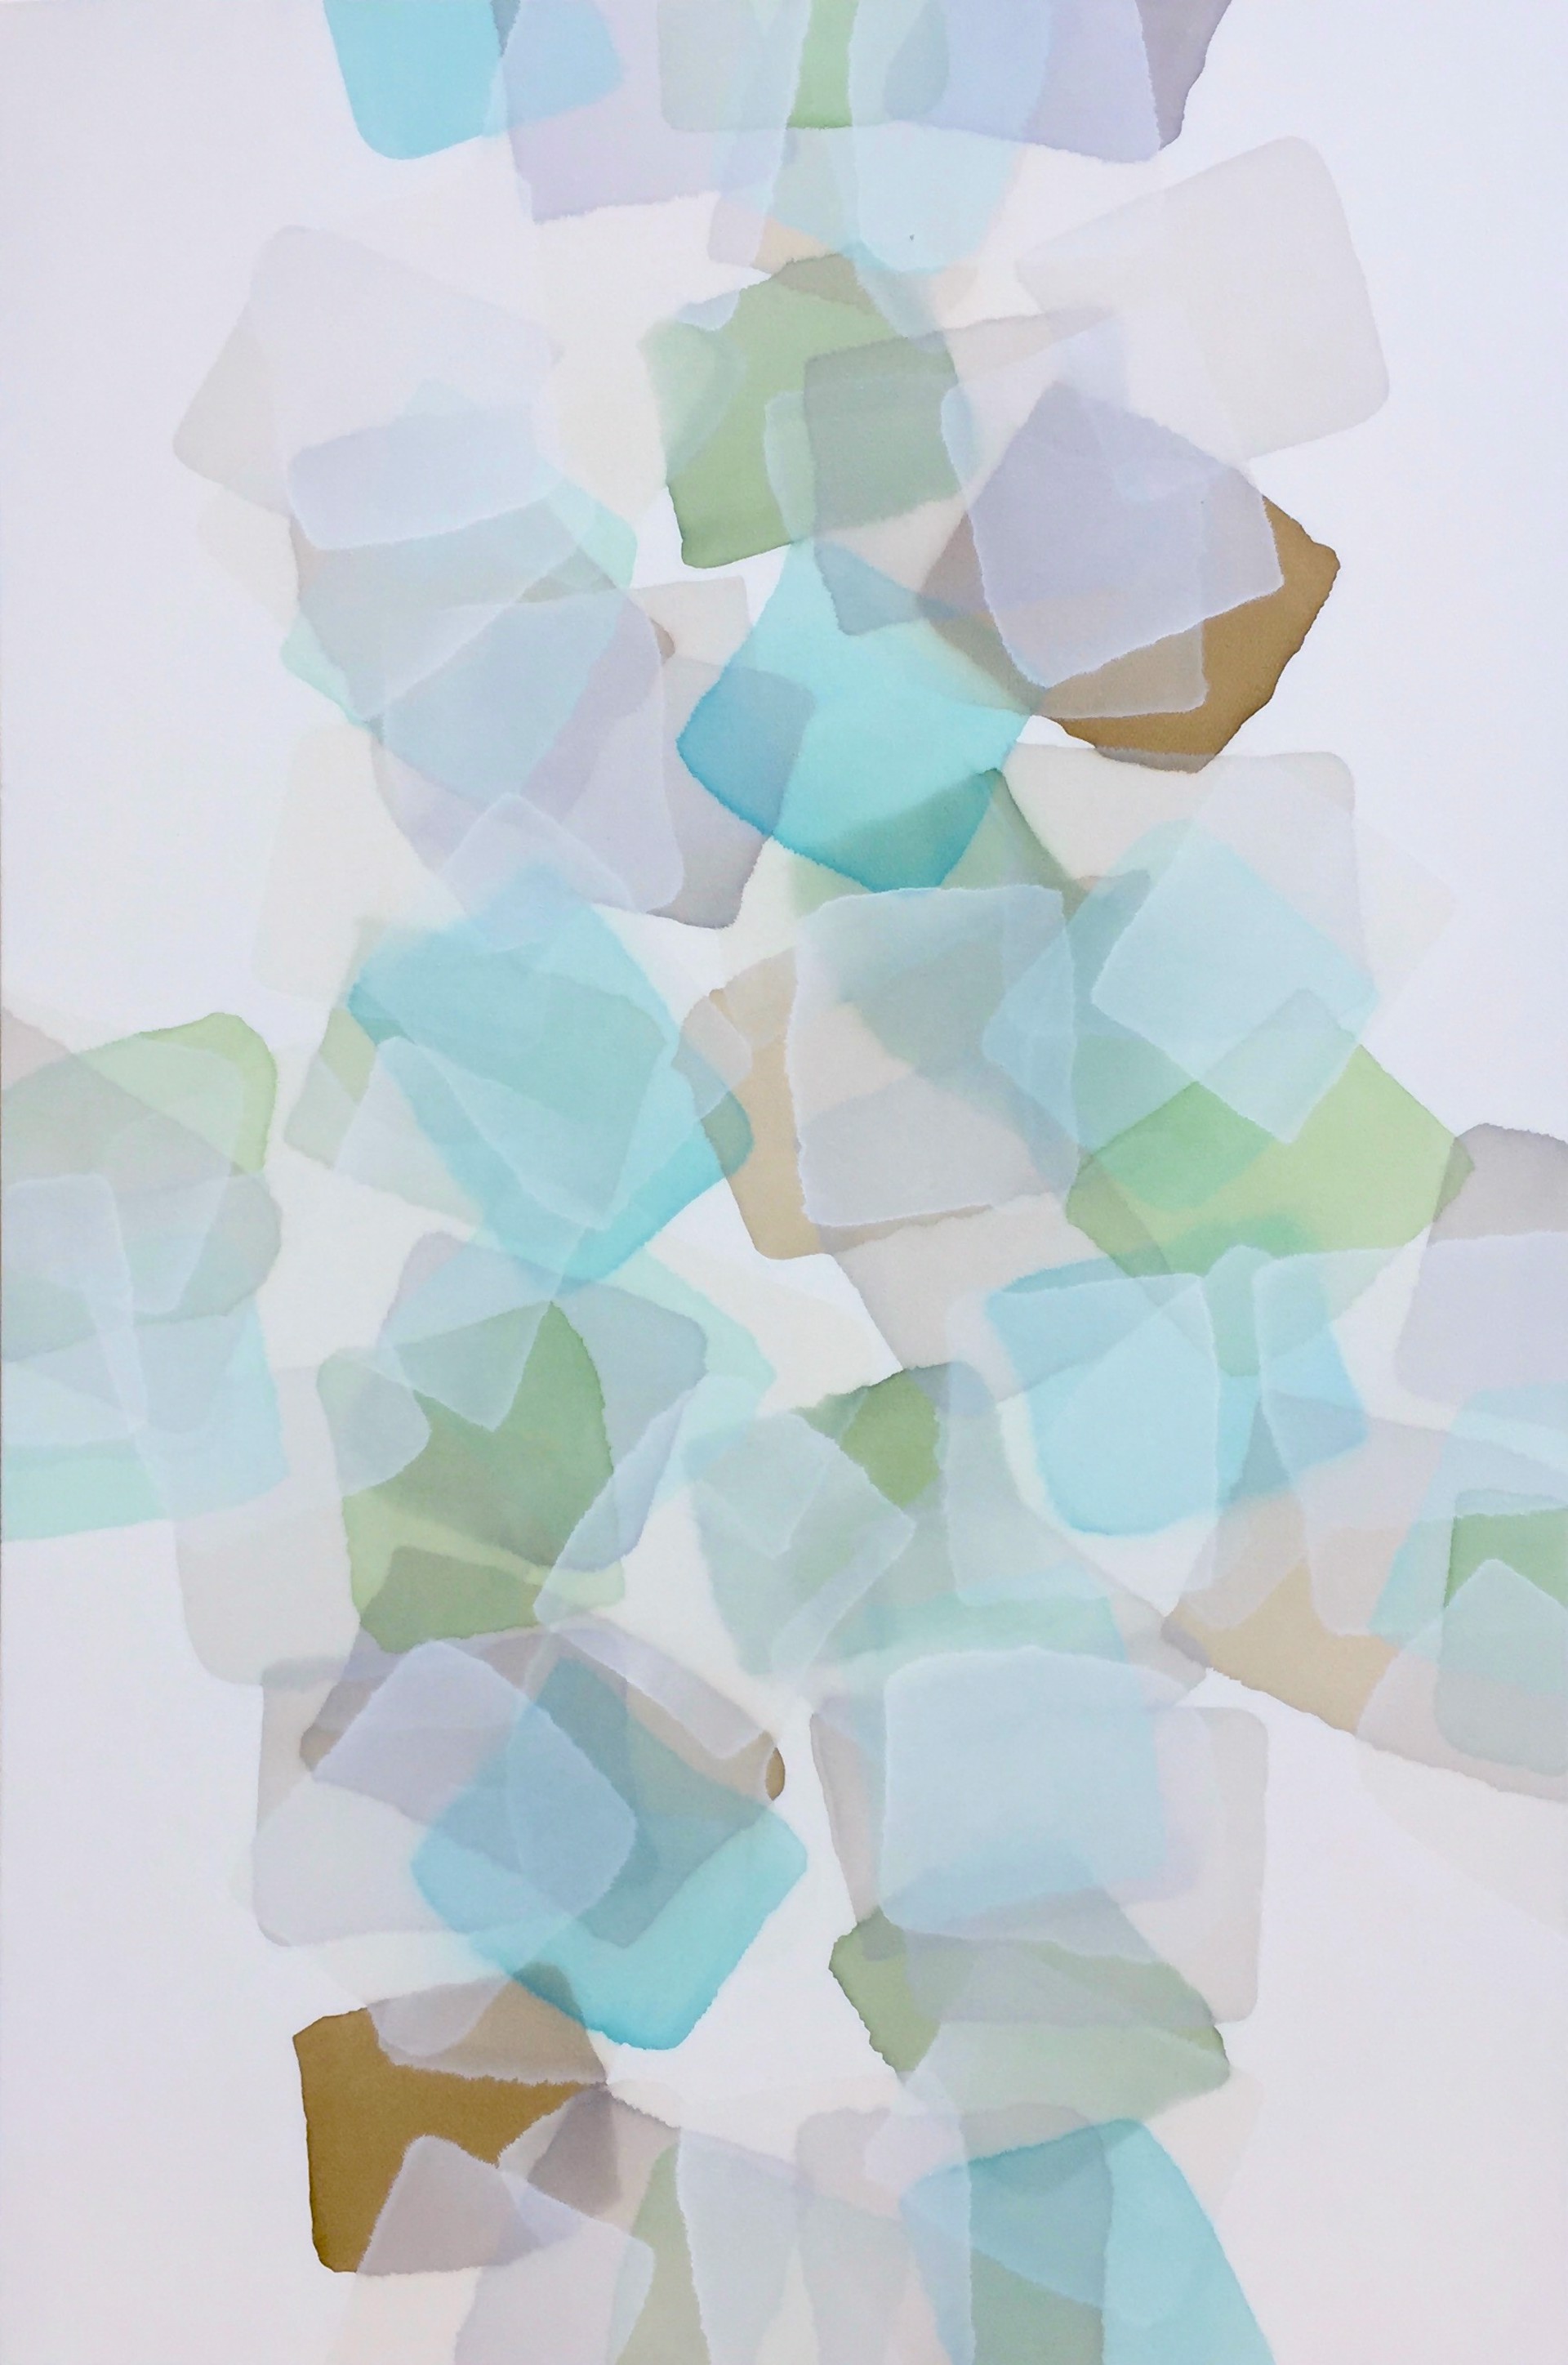 An abstract acrylic painting of seemingly translucent overlapping squares of soft colors by artist Charlie Bluett